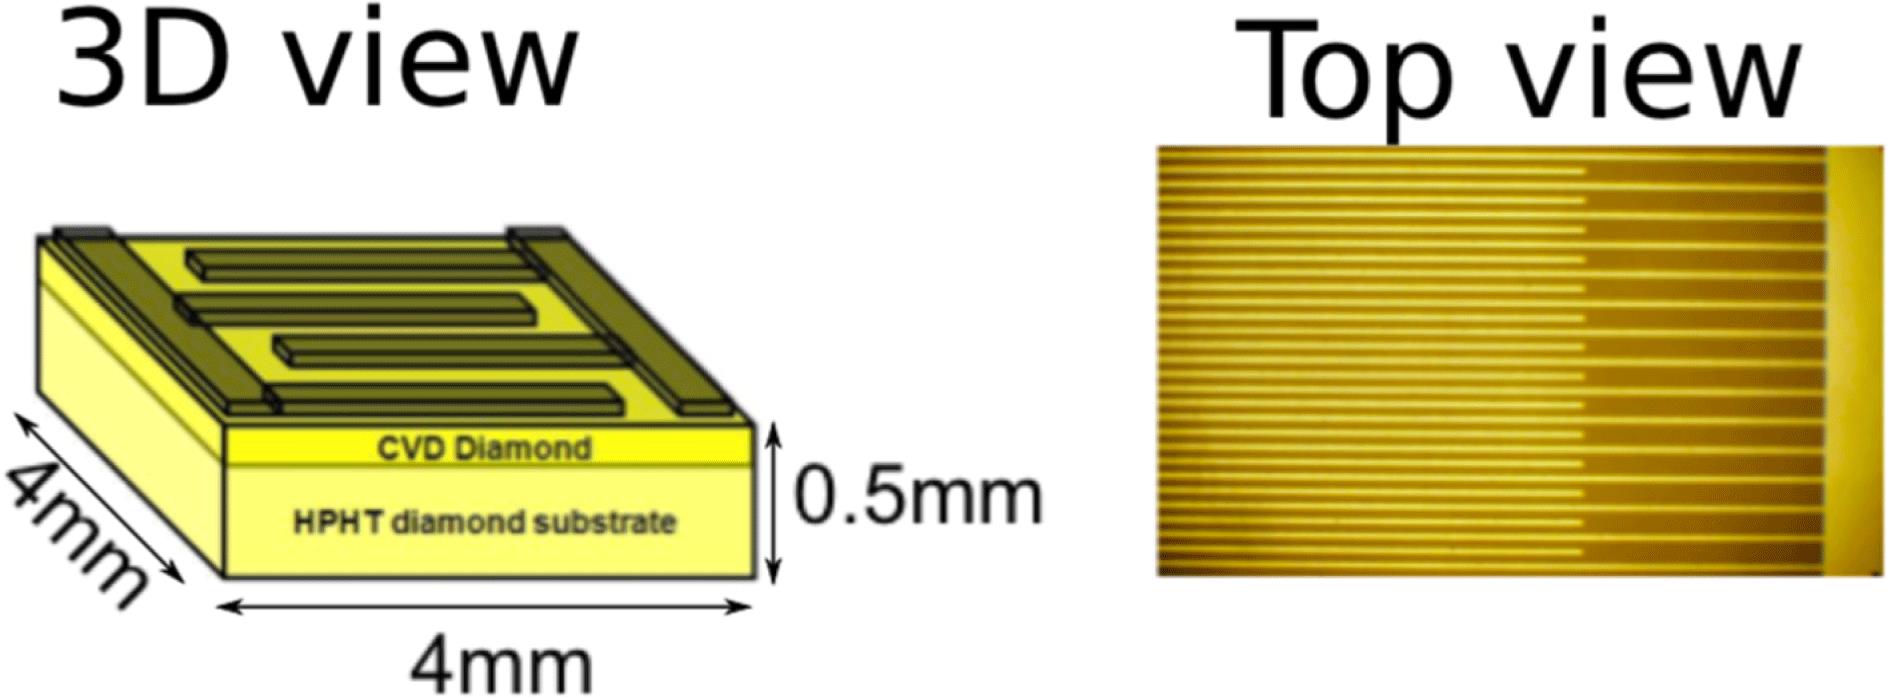 Time-of-flight detector geometry. Schematic representation of the device layer structure (left) and picture of the surface Al interdigitated electrodes (right). The metal fingers were processed to $20~\unicode[STIX]{x03BC}\text{m}$ in width, with a spacing between the electrodes of $20~\unicode[STIX]{x03BC}\text{m}$. The detector active area was approximately $2~\text{mm}^{2}$.